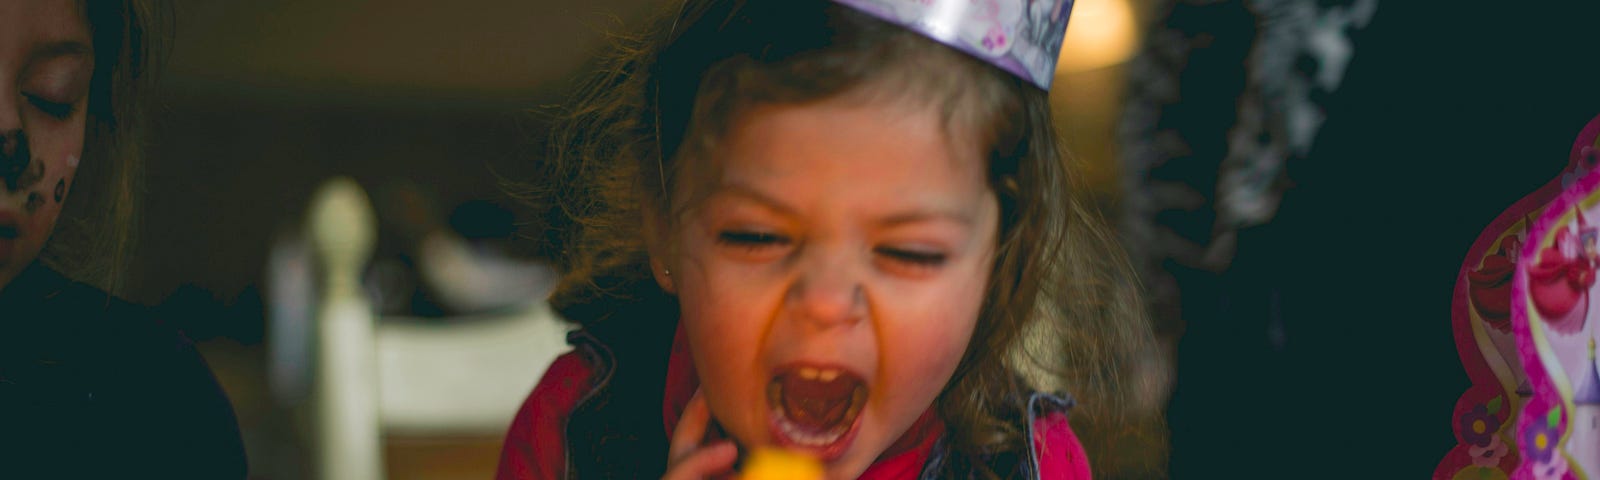 Picture of a young girl seated at a table in a party hat with her mouth wide open, either screaming or gathering breath to blow out 6 red candles on her birthday cake.